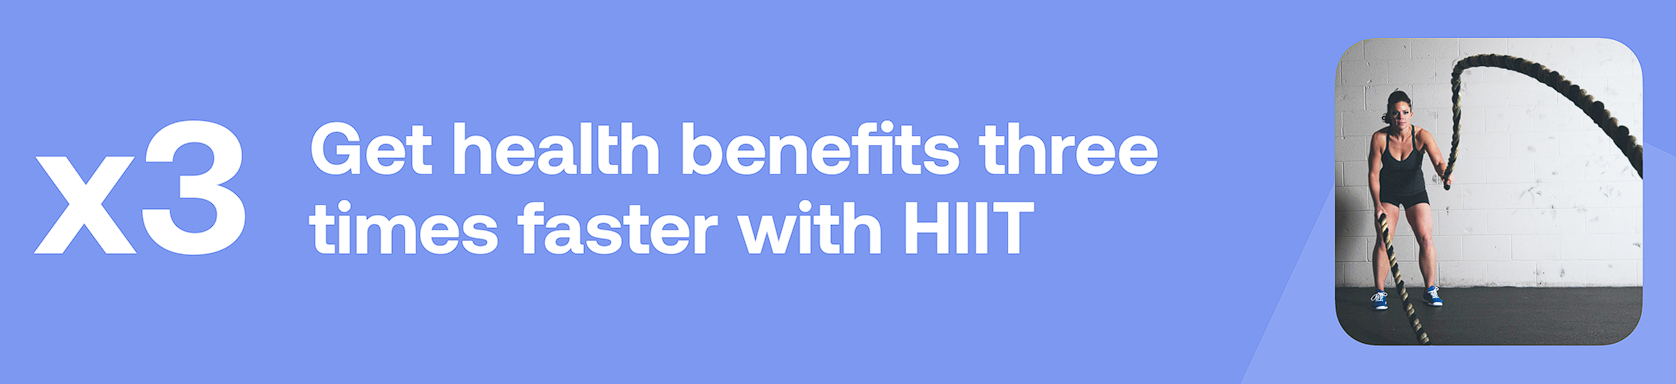 x3 Get health benefits three times faster with HIIT